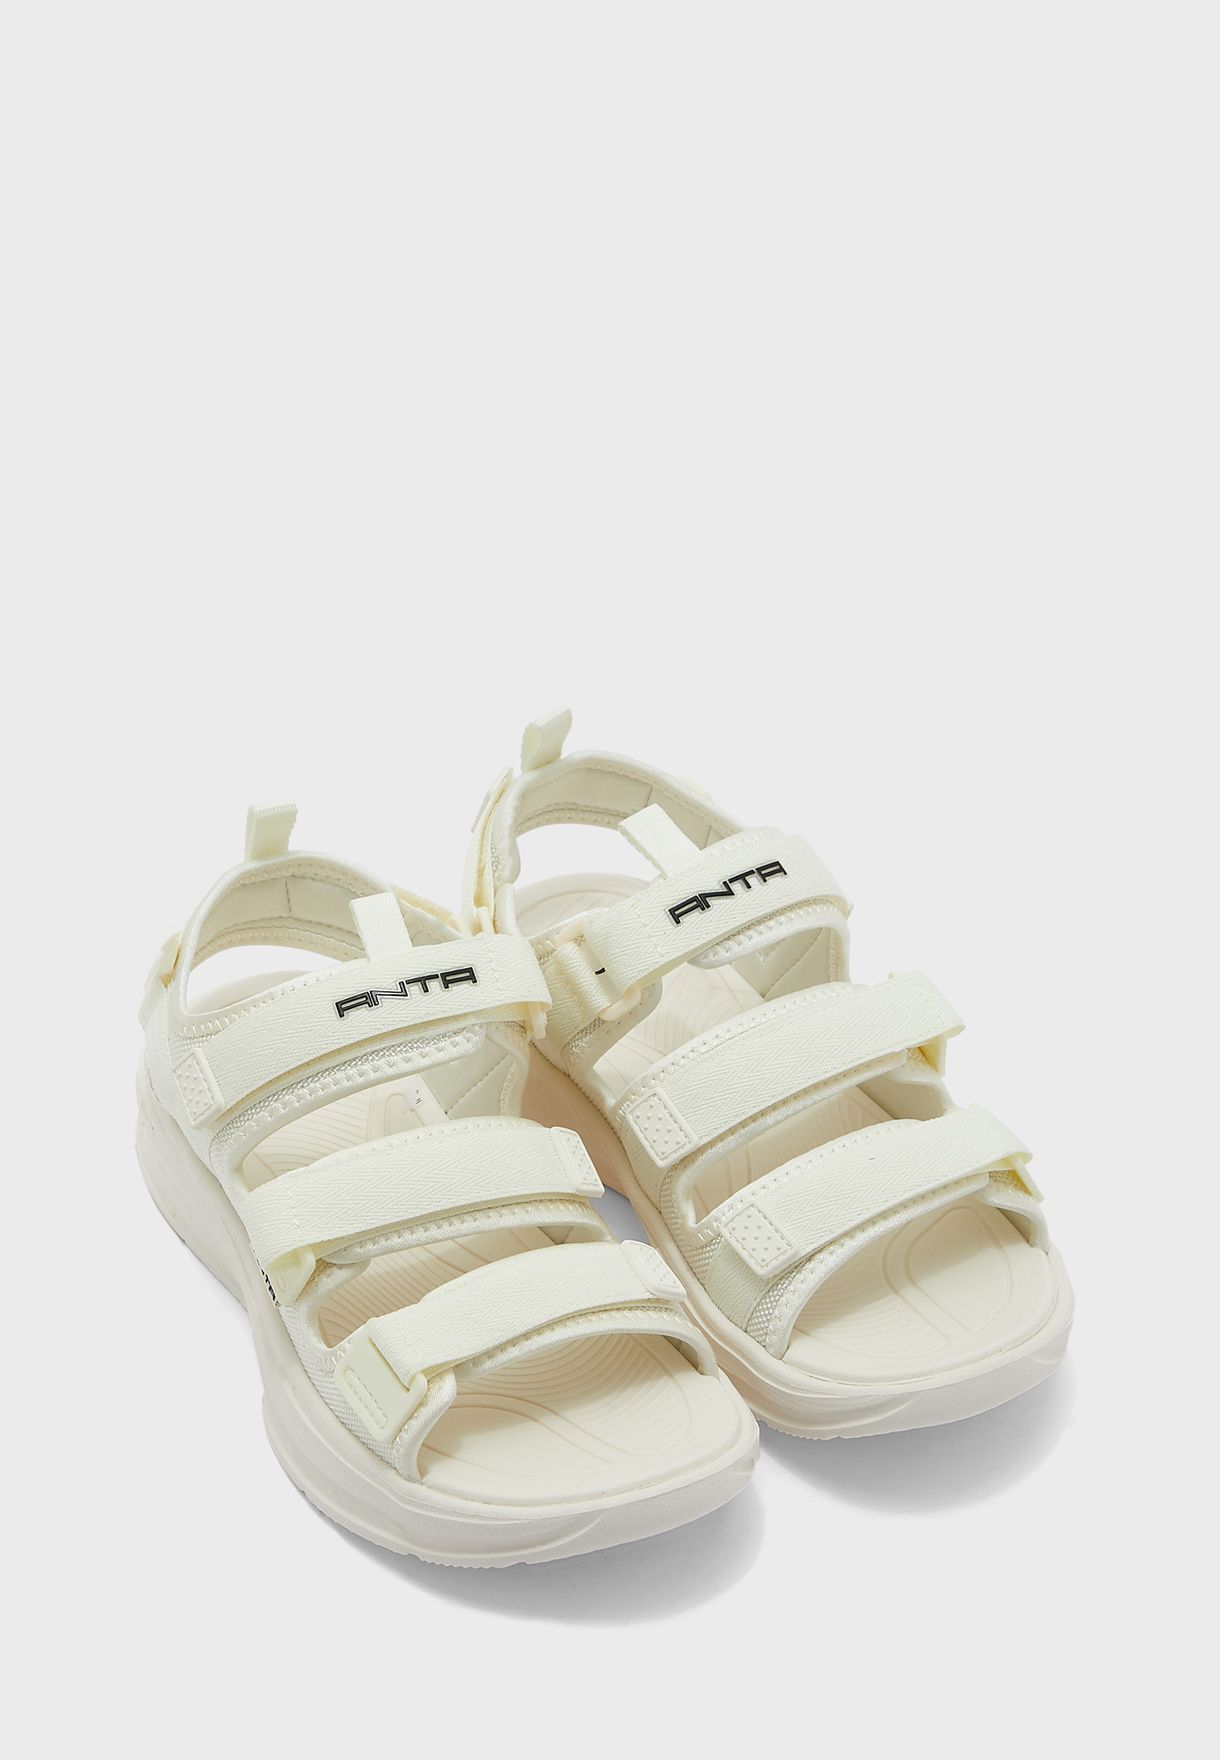 Buy Anta white Sandals for Women in Kuwait city, other cities